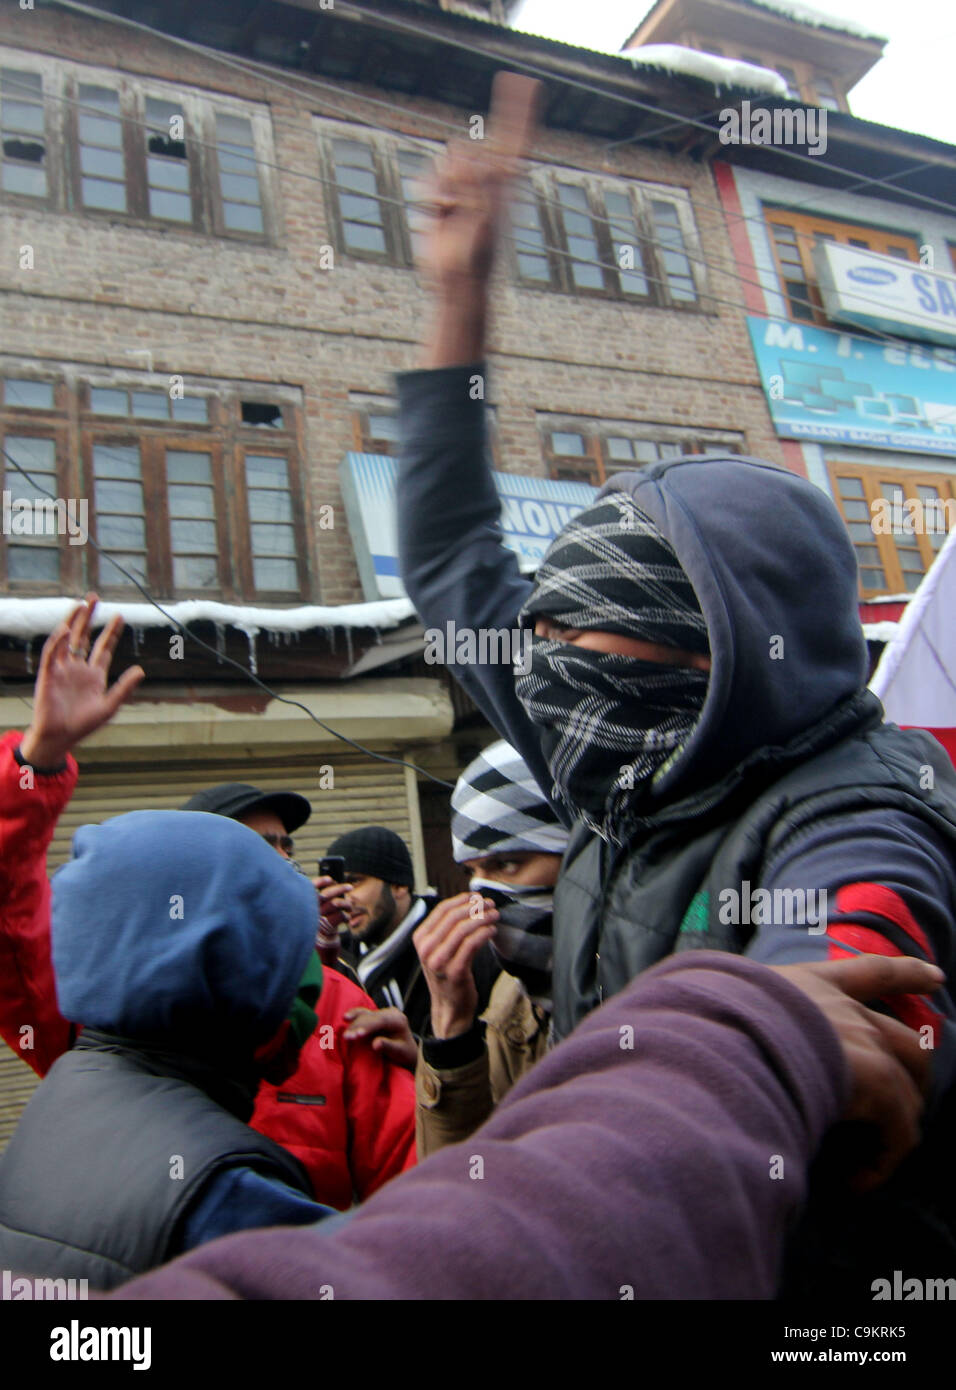 Activists and supporters of Jammu Kashmir Liberation Front (JKLF) shout freedom slogans during a protest in Srinagar,the summer capital of indian kashmir on  Jan21, 2012. The protesters were marching towards the Gaw Kadal Bridge here when the police used batons to disperse them. The protests were pa Stock Photo